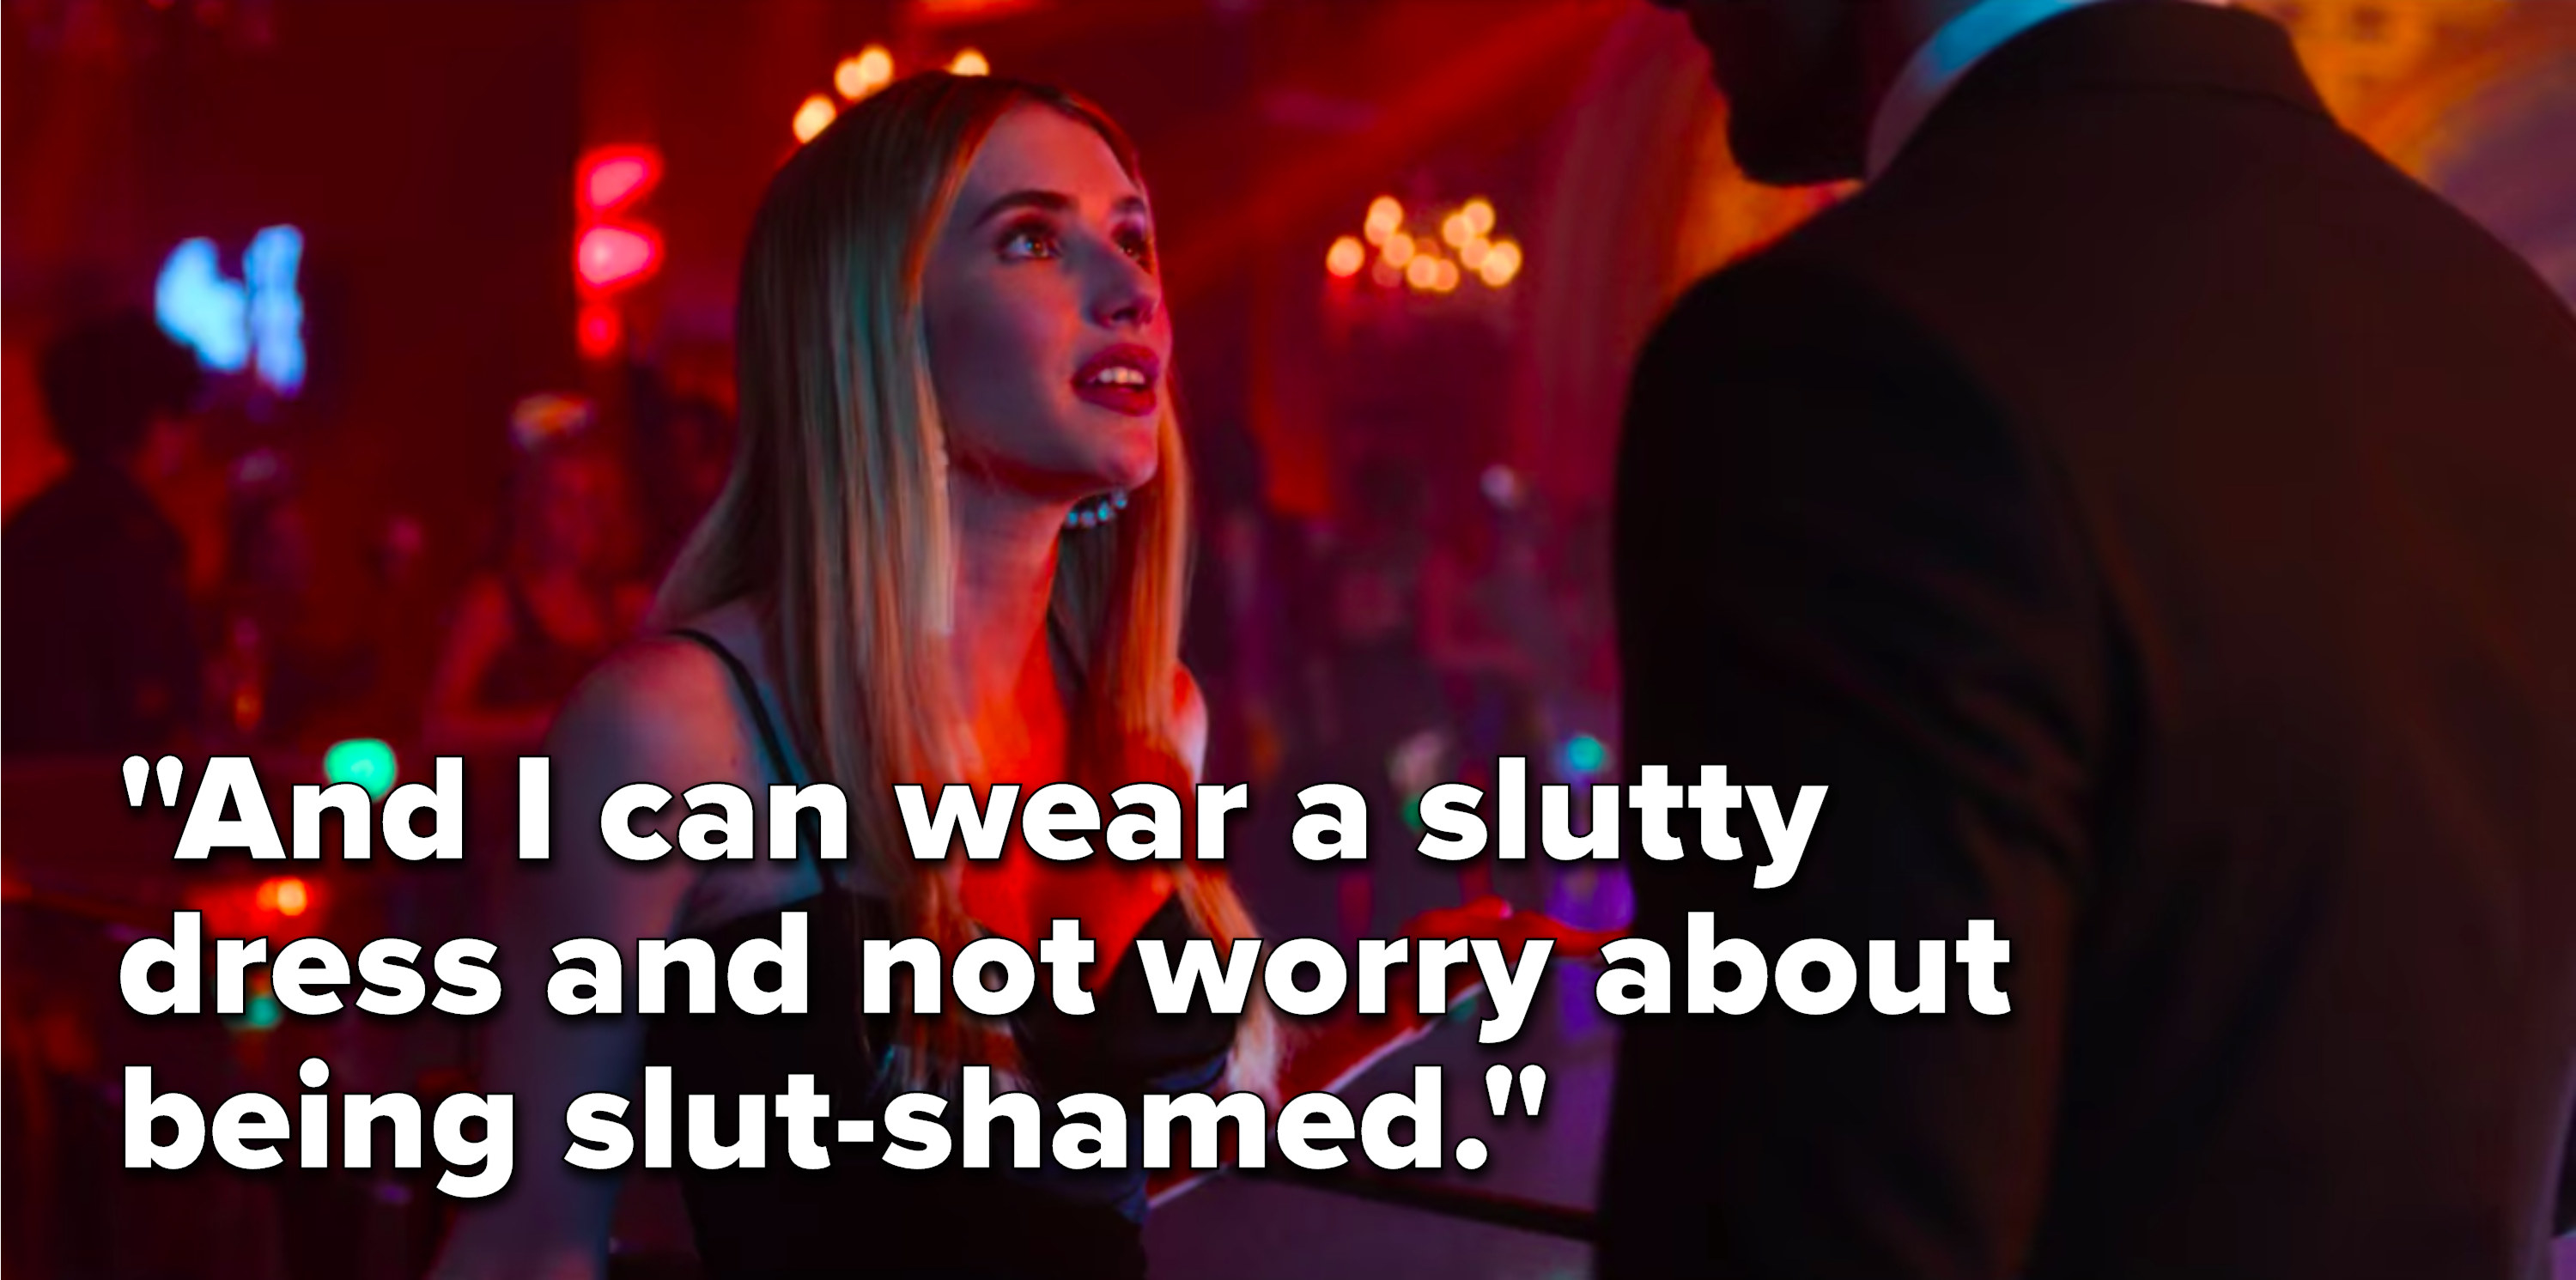 Sloane says, &quot;And I can wear a slutty dress and not worry about being slut-shamed&quot;